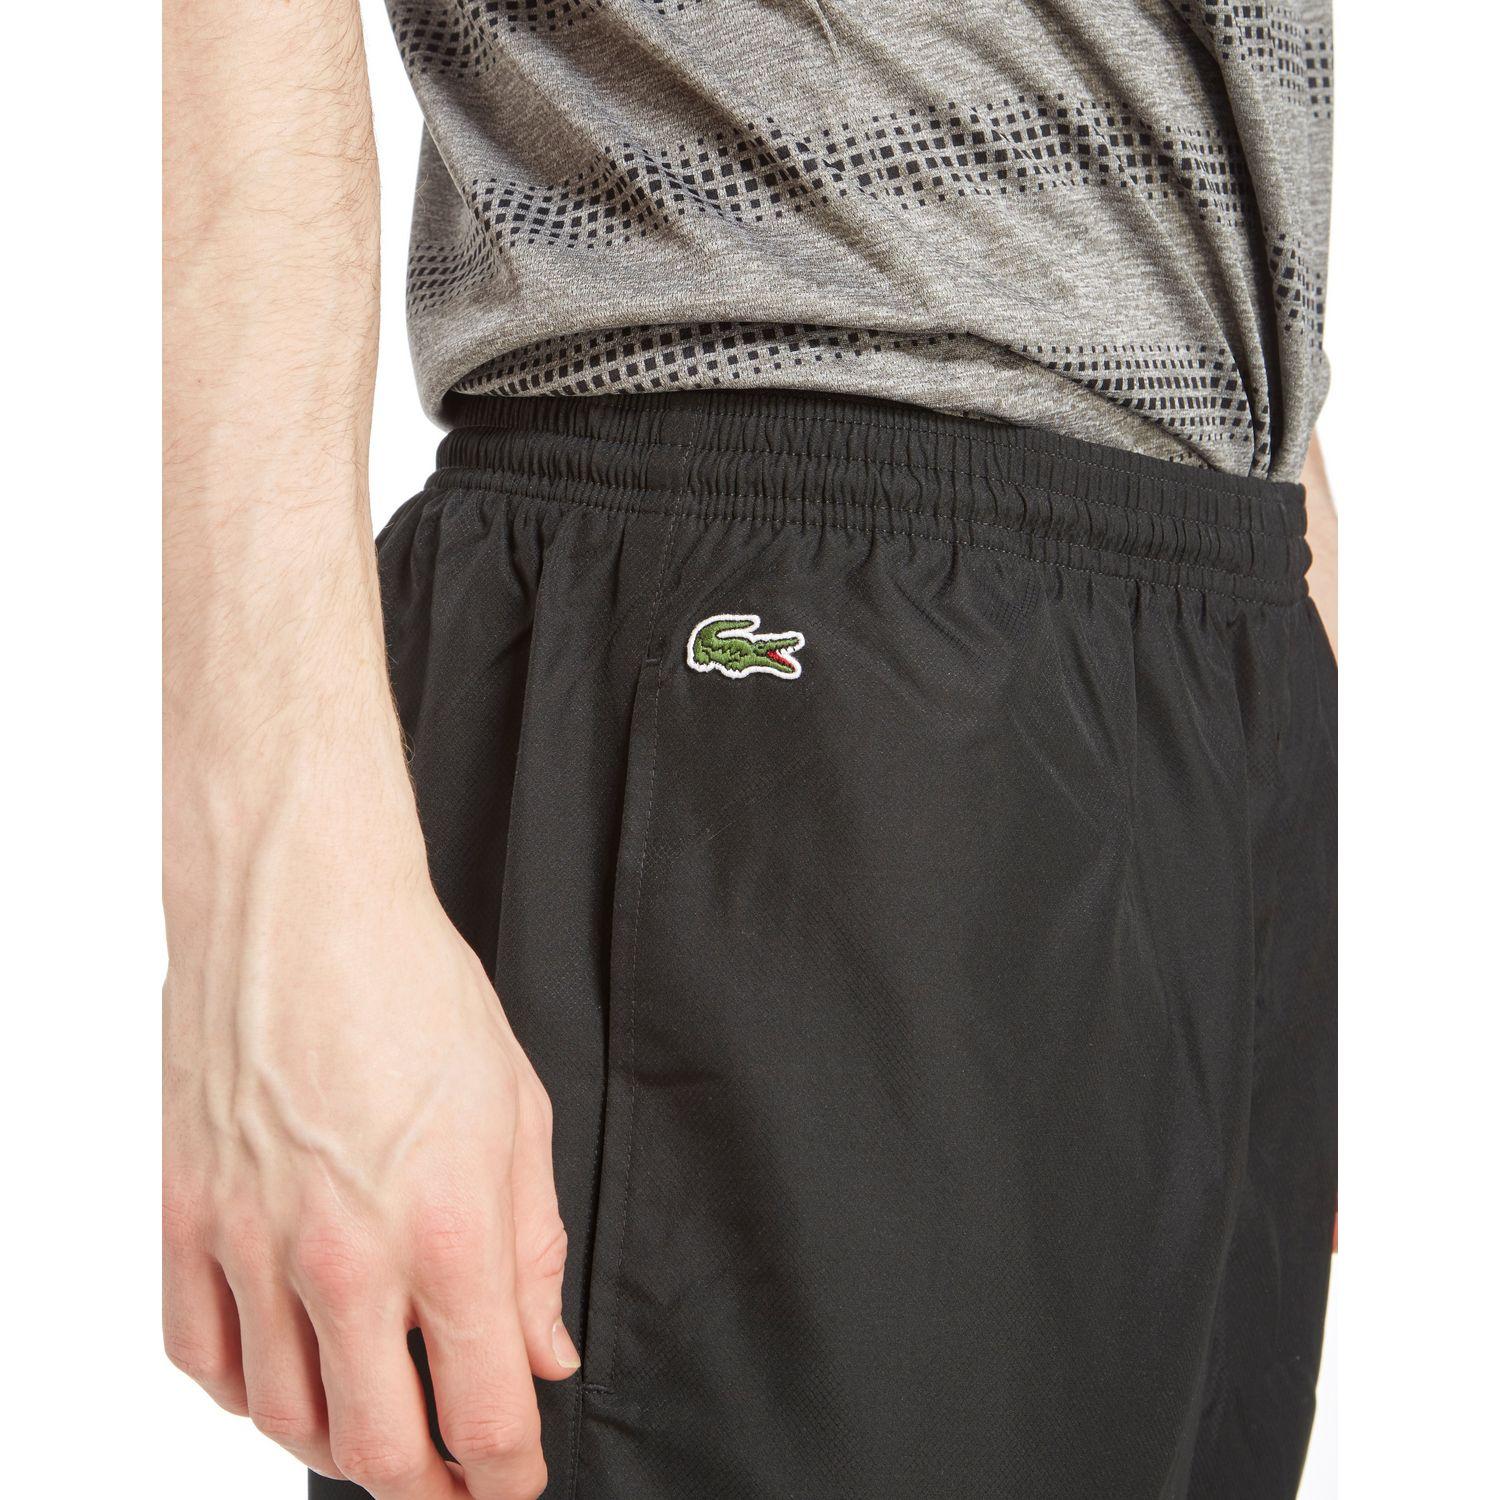 Lacoste Cotton Guppy Track Pants in Black for Men - Lyst